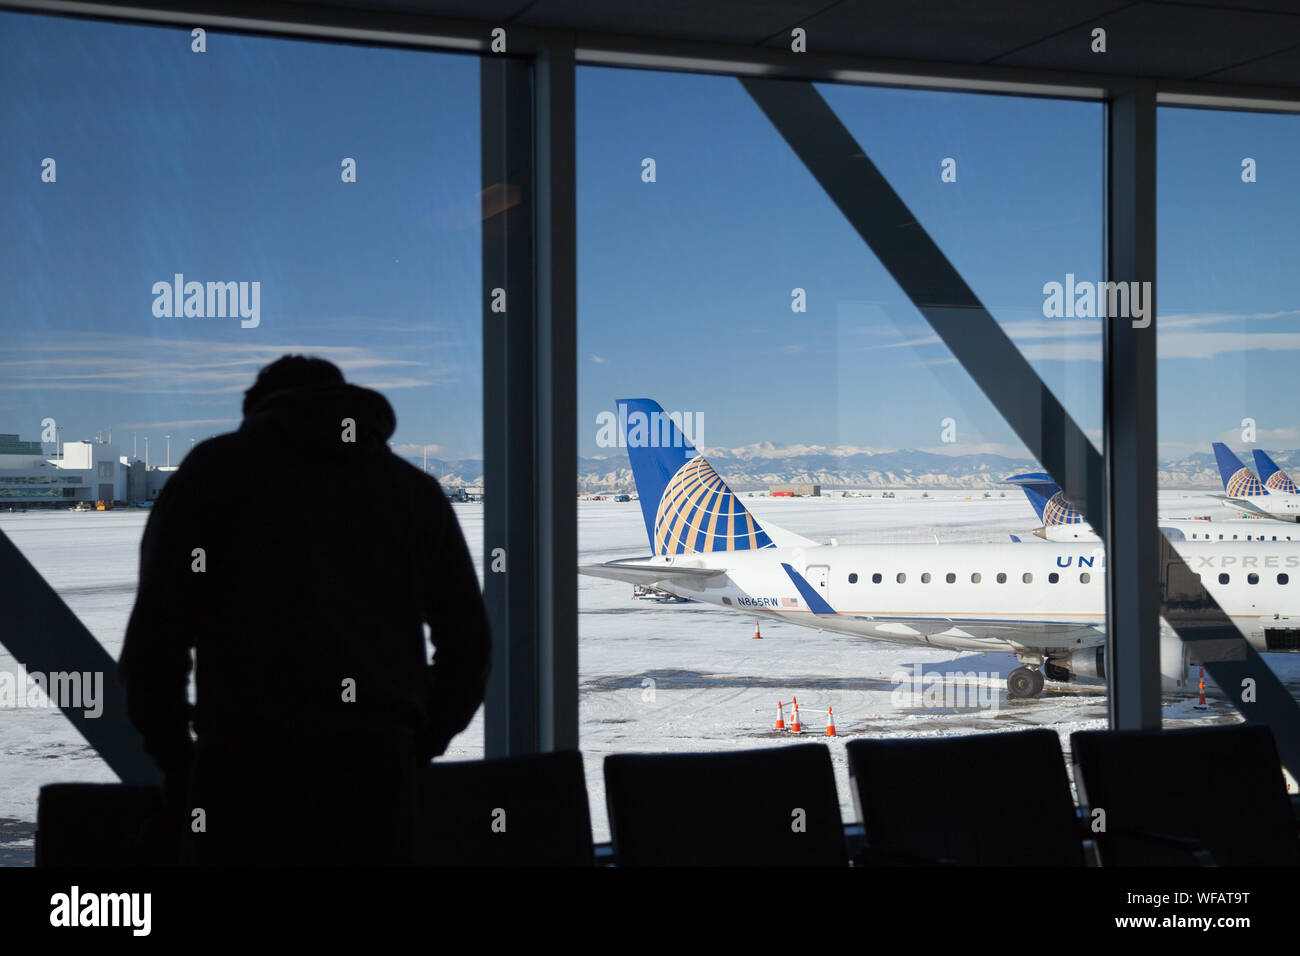 A silhouette of a male traveler looking out window where United Airline fleet are positioned on the snow capped ground at Denver International Airport. Stock Photo